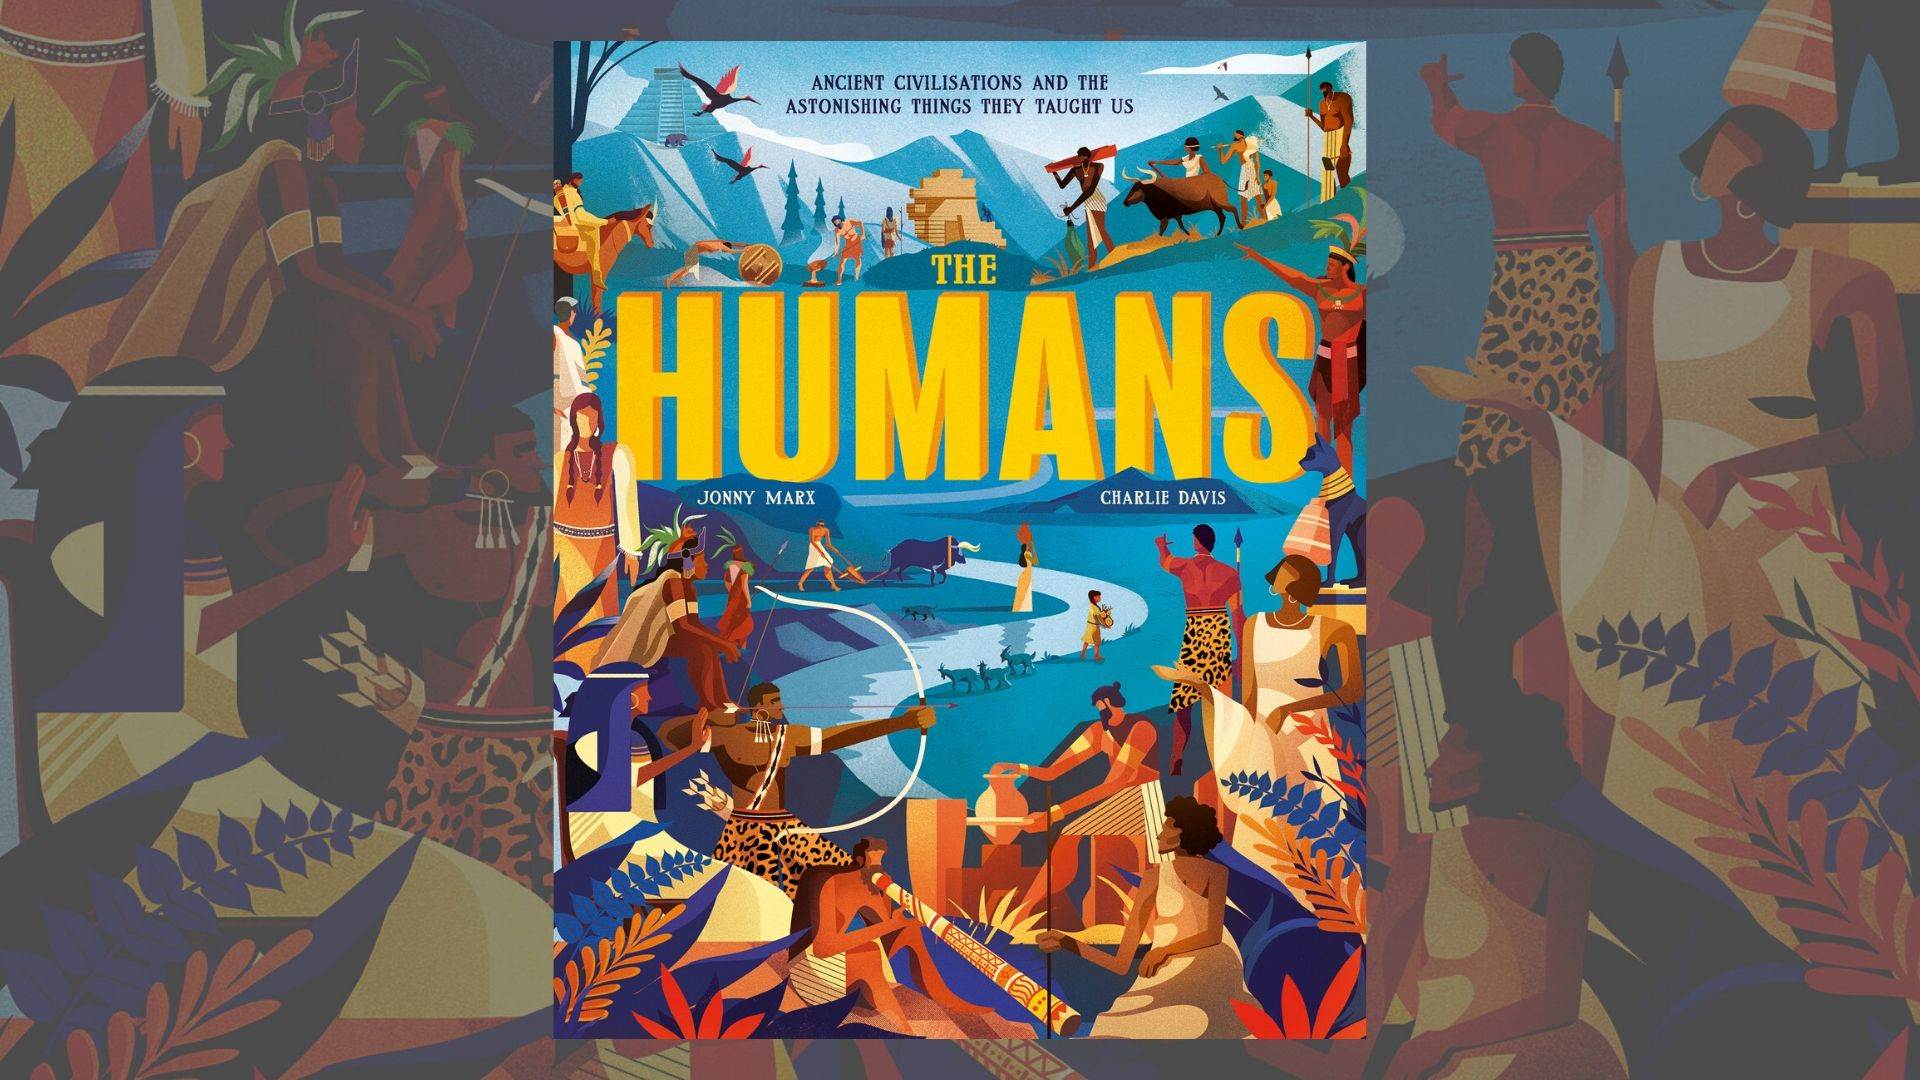 The front cover of The Humans